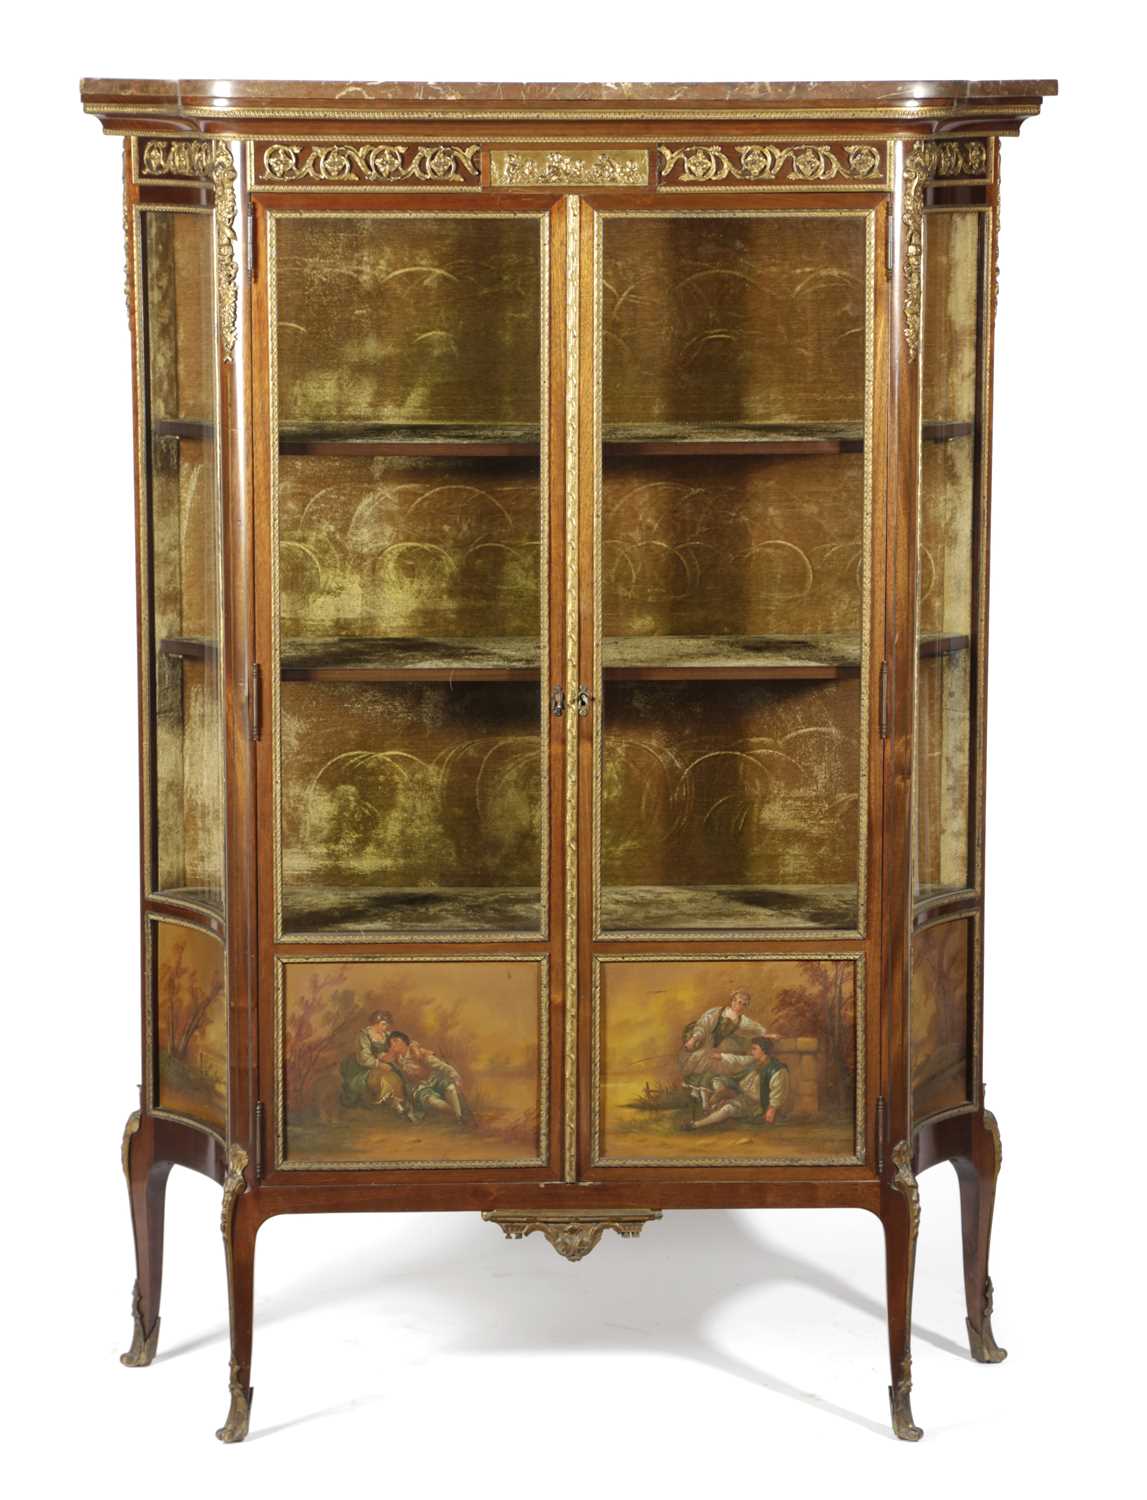 A FRENCH MAHOGANY AND VERNIS MARTIN VITRINE IN LOUIS XV STYLE, EARLY 20TH CENTURY with ormolu